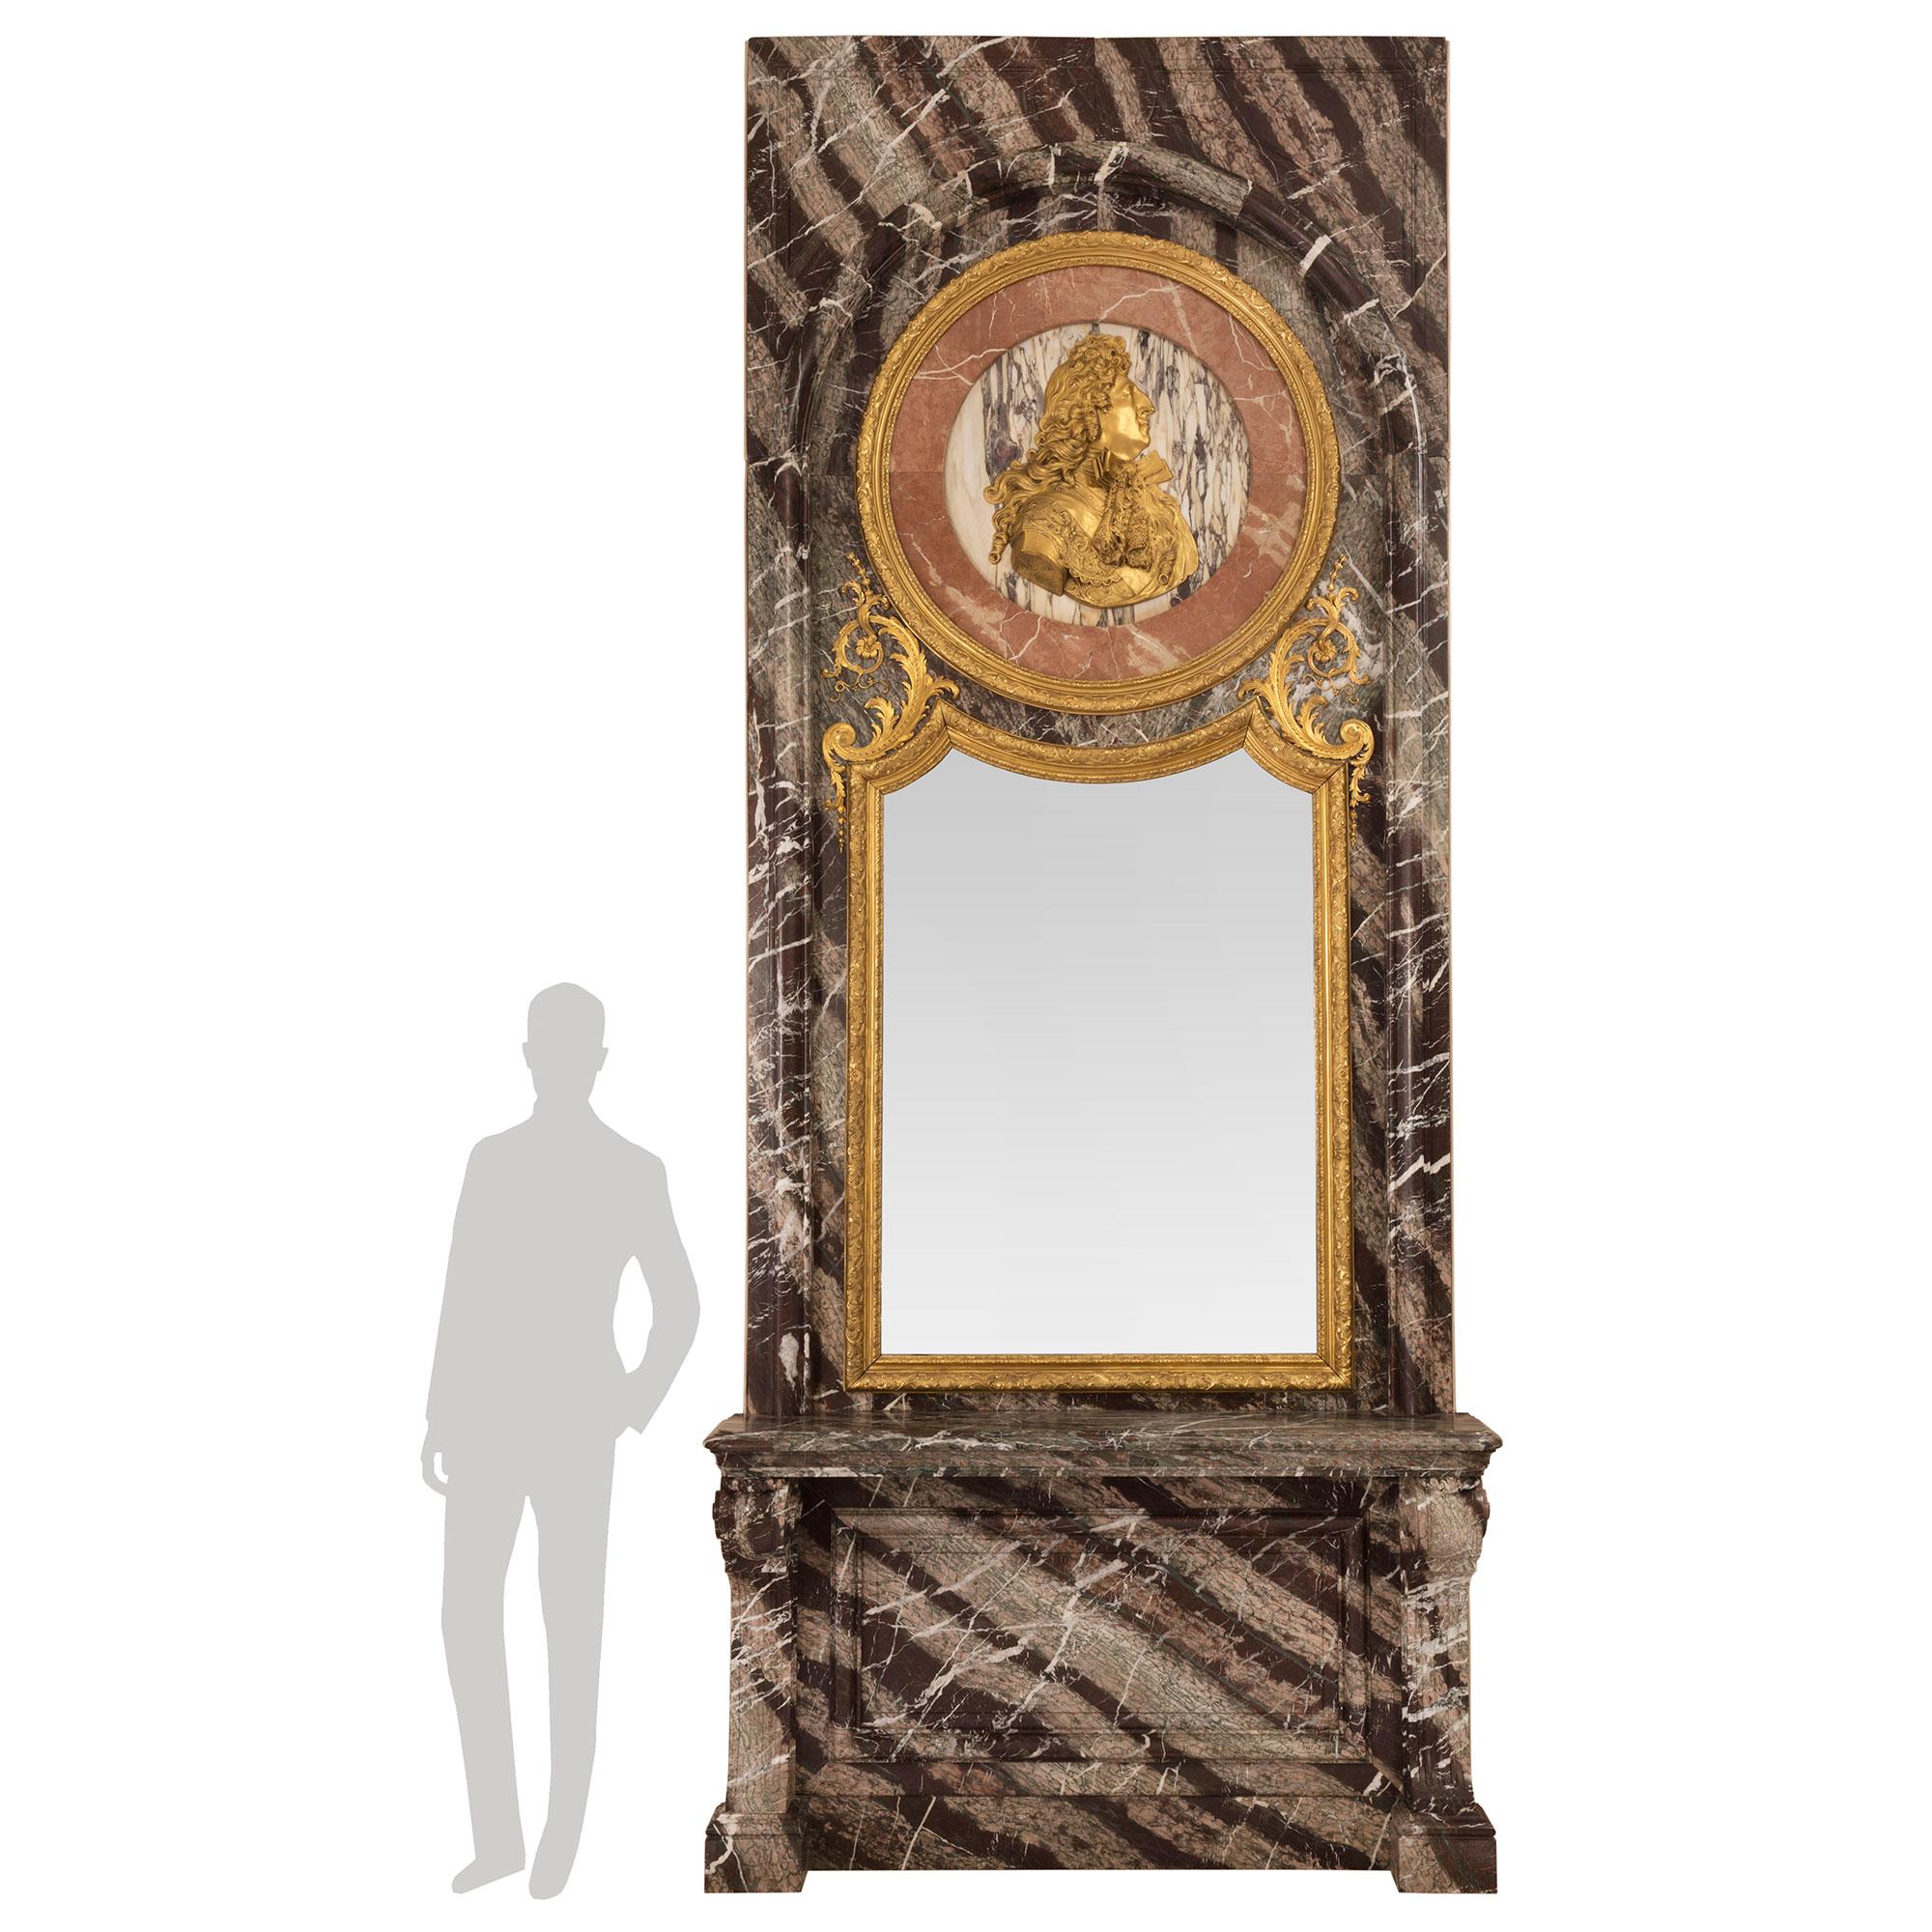 A stunning and palatially scaled French mid 19th century Louis XIV st. ormolu, giltwood, Campan Rubané, Rose Vif and Fleur de Pêcher marble console and matching mirror. Standing over twelve feet tall, this most impressive and statement-making